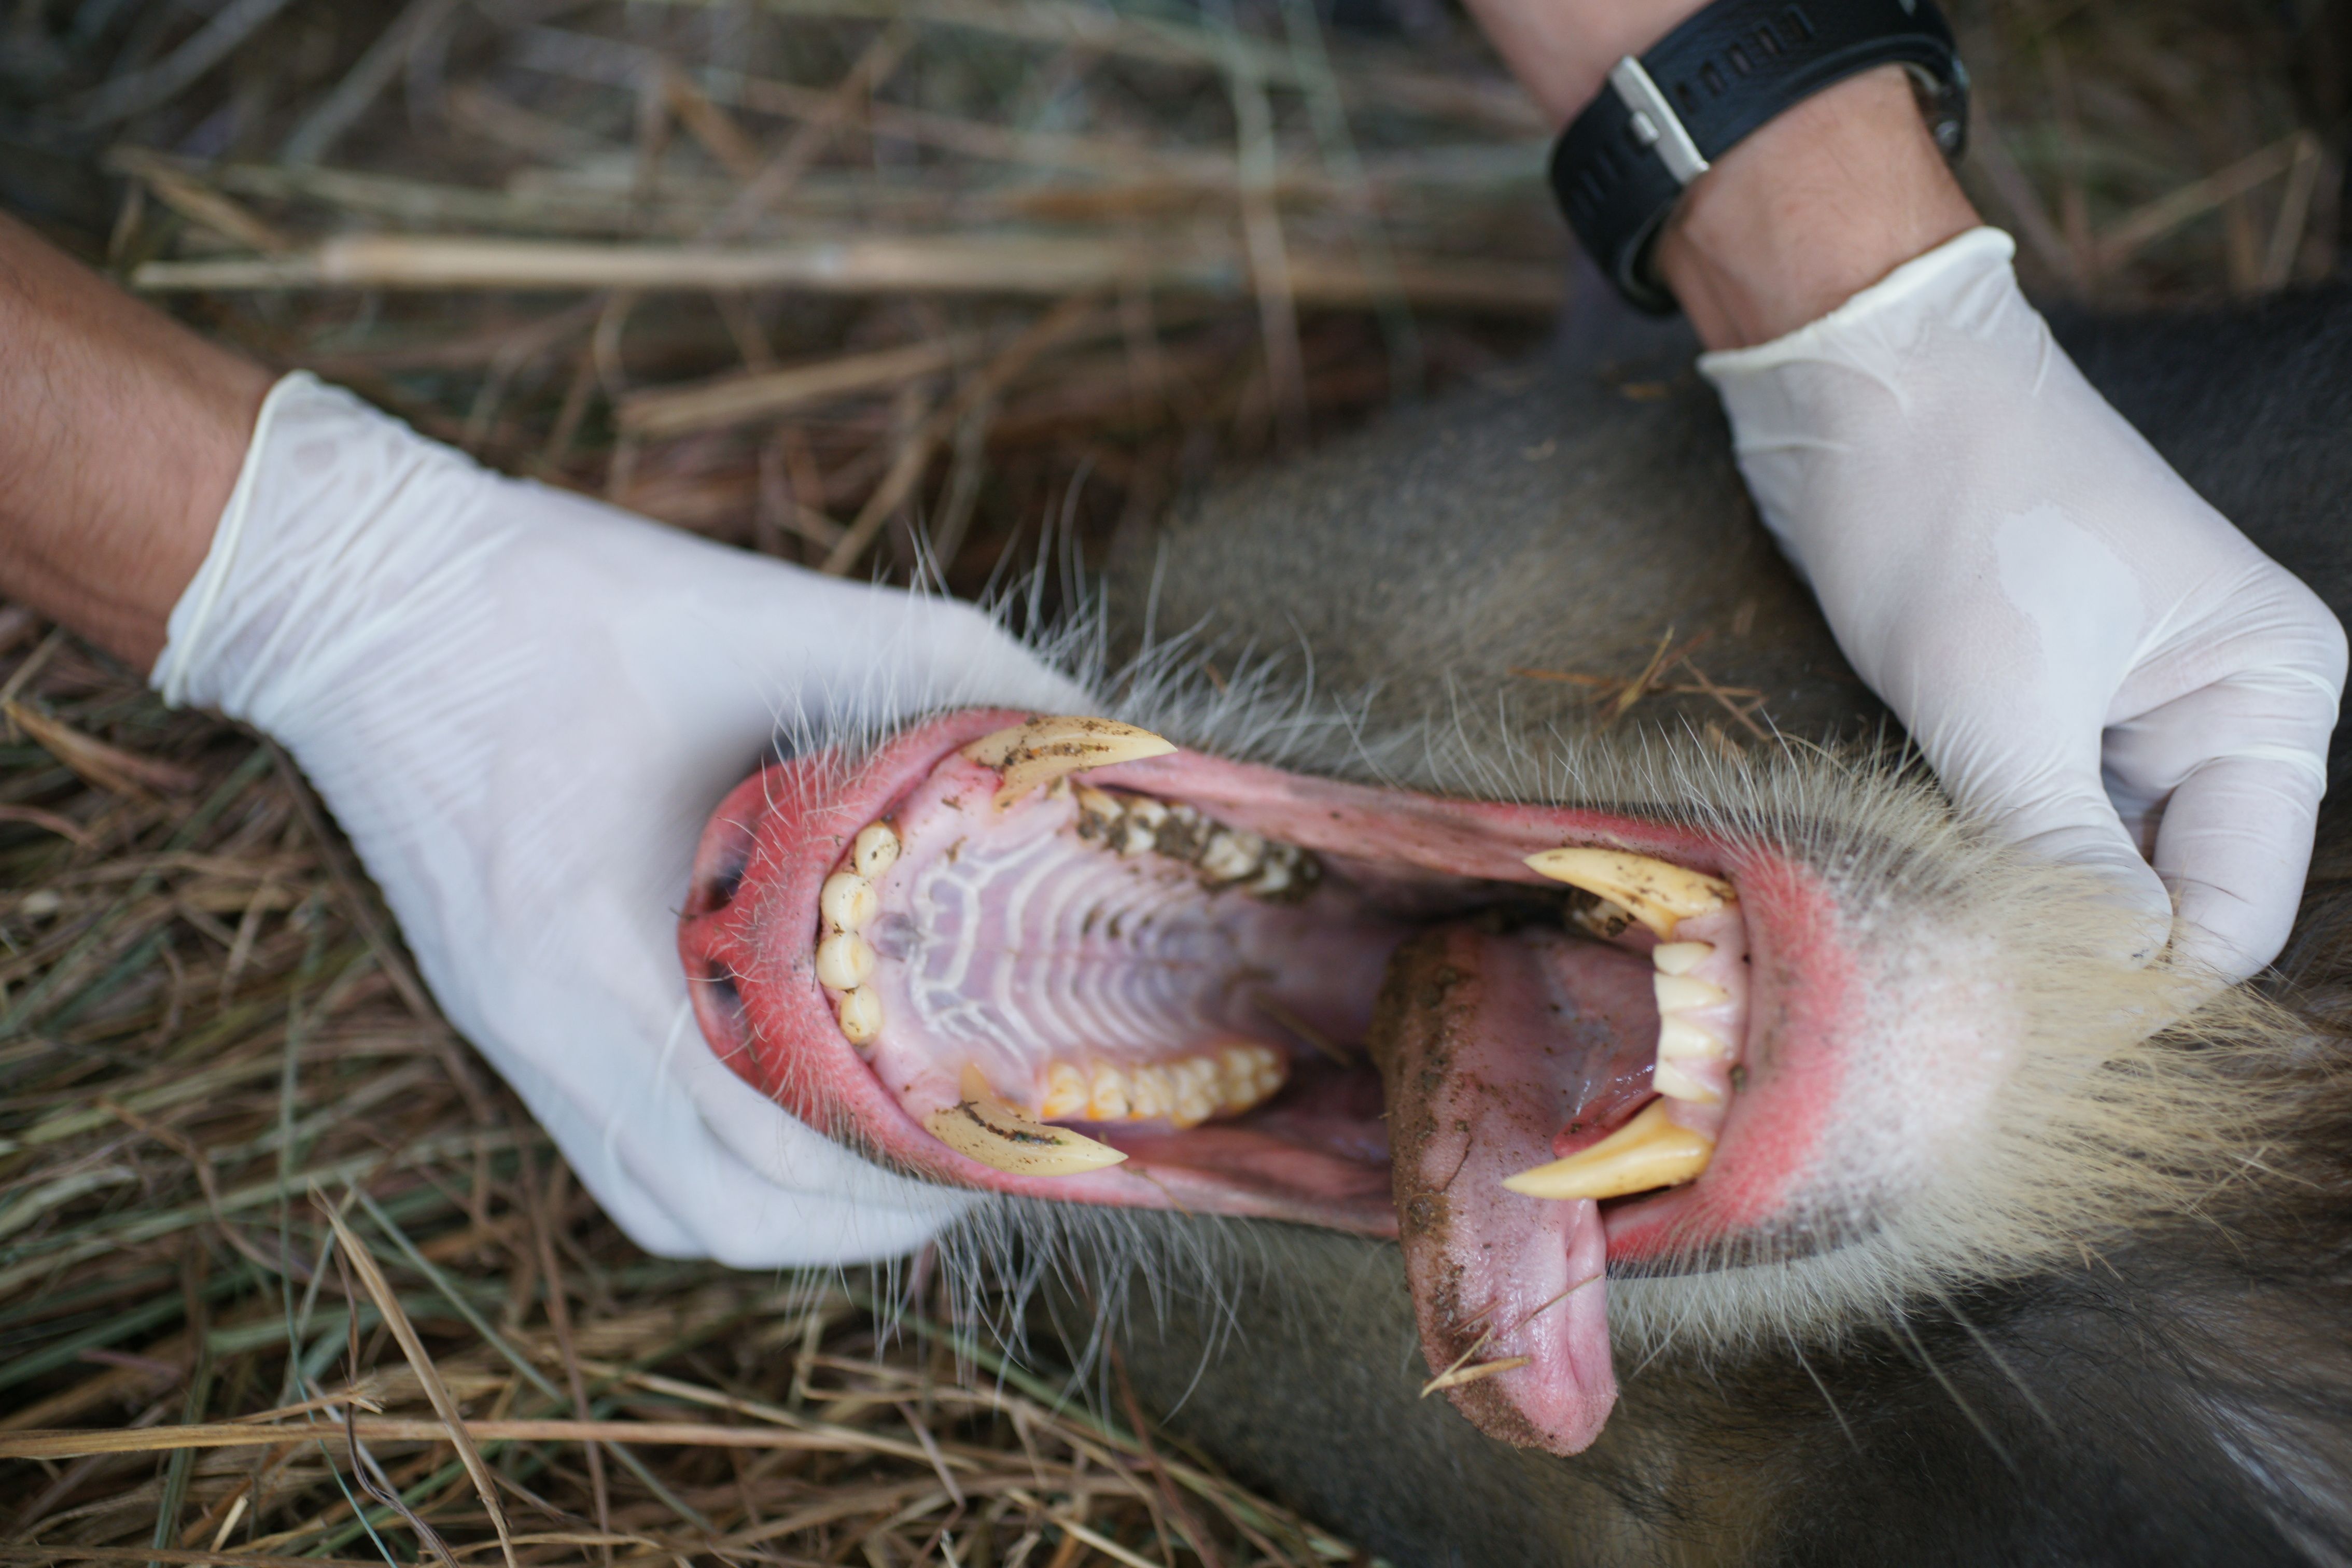 Mandrill with his mouth wide open showing his teeth for checking